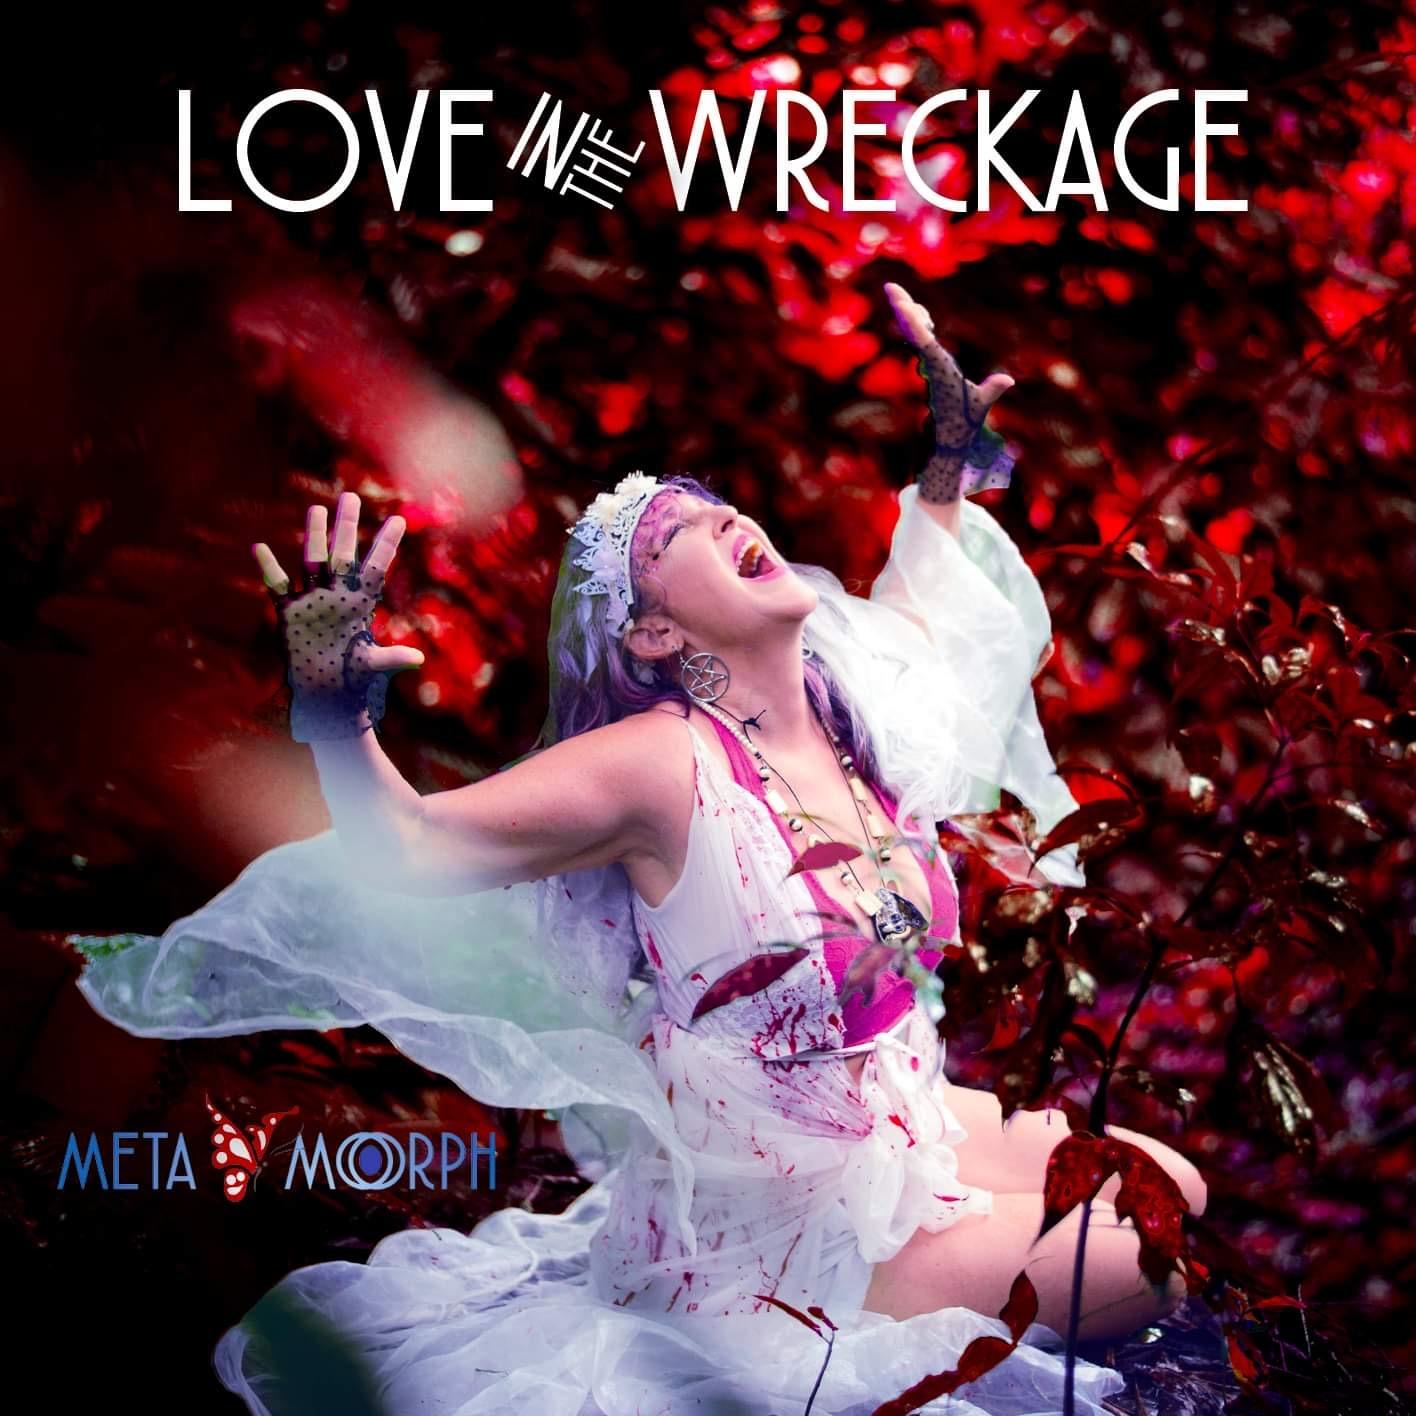 Romance blooms in the wreckage of Metamorph’s new single in 2022